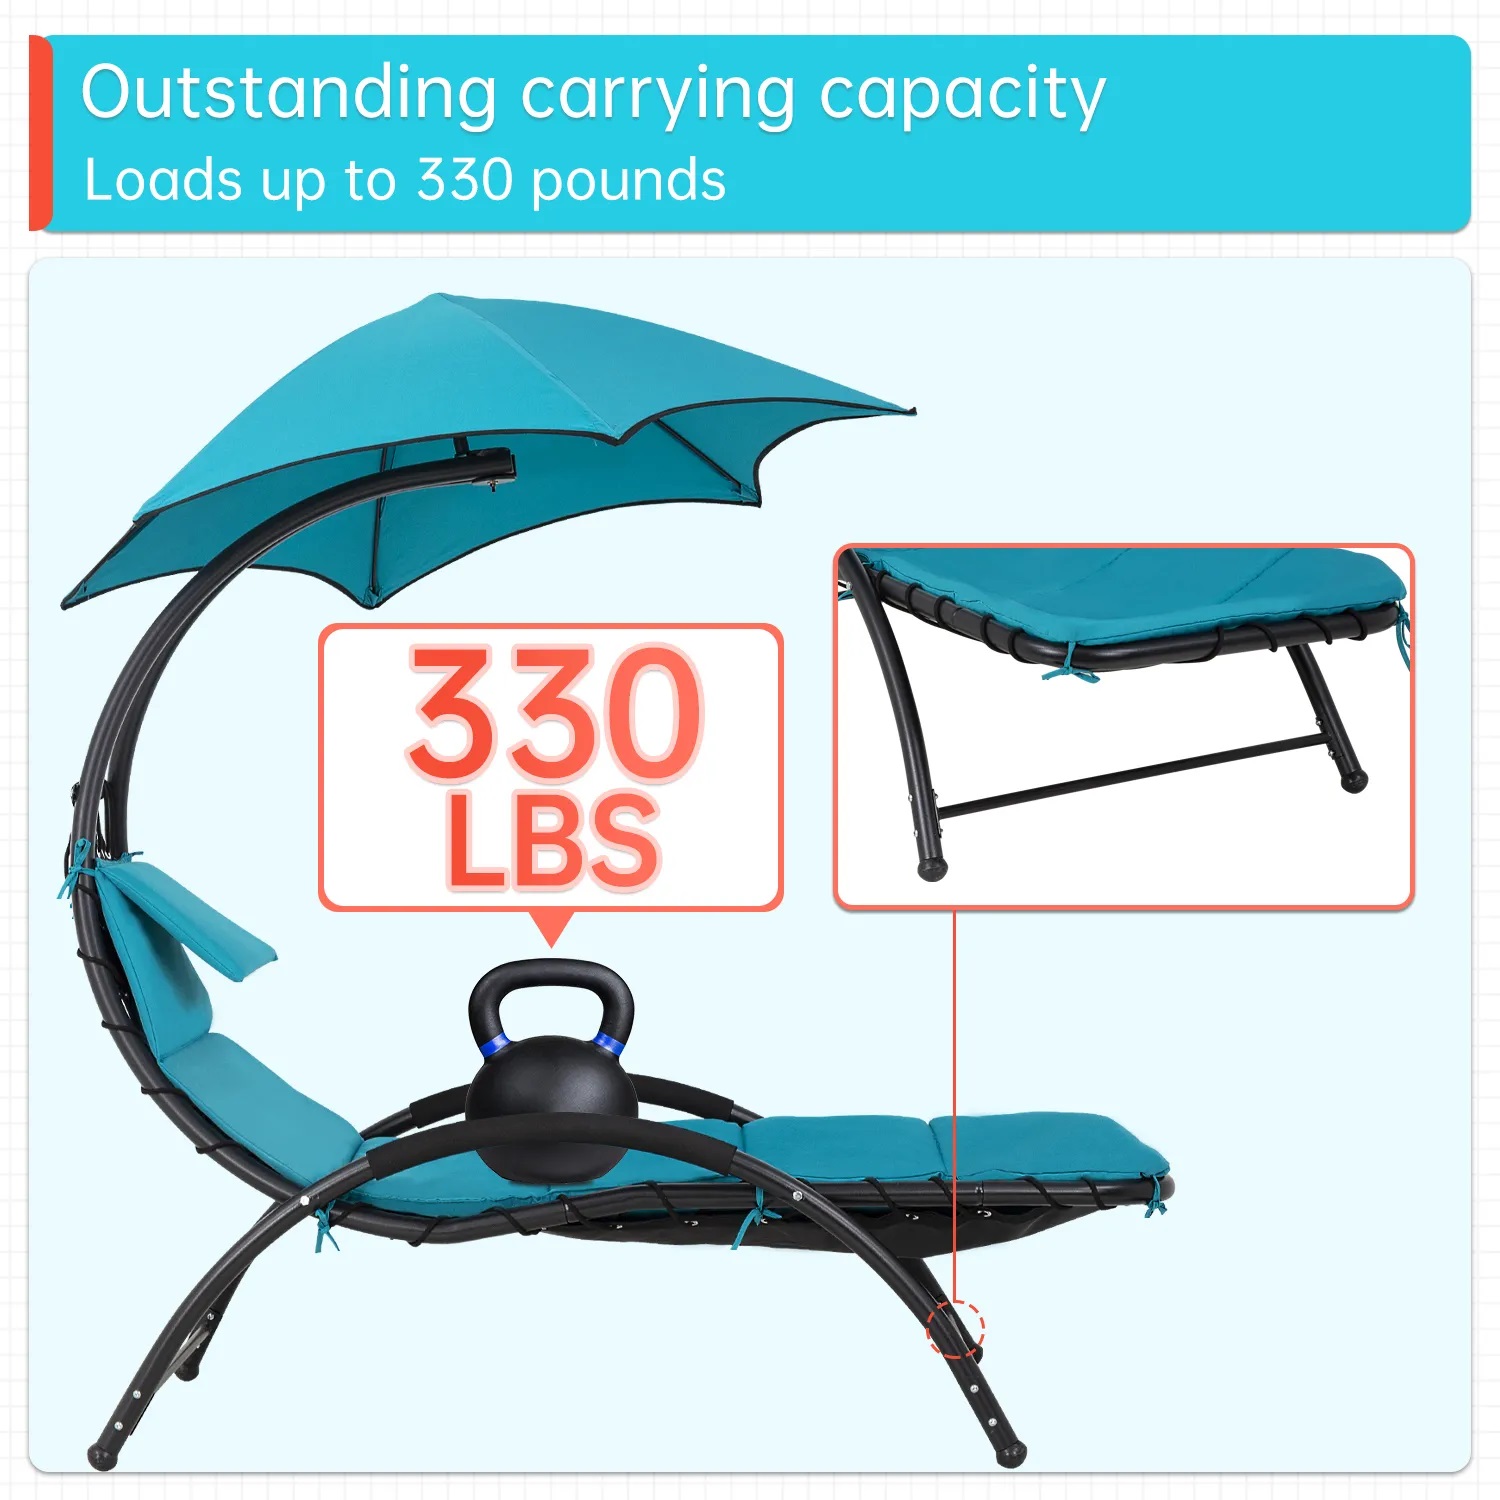 YRLLENSDAN Patio Swing Chair, Lounge Chair Outdoors with Waterproof Canopy Hammock Chair Patio Chair Arc Stand Removable Cushion and Headrest (Blue) - image 3 of 7